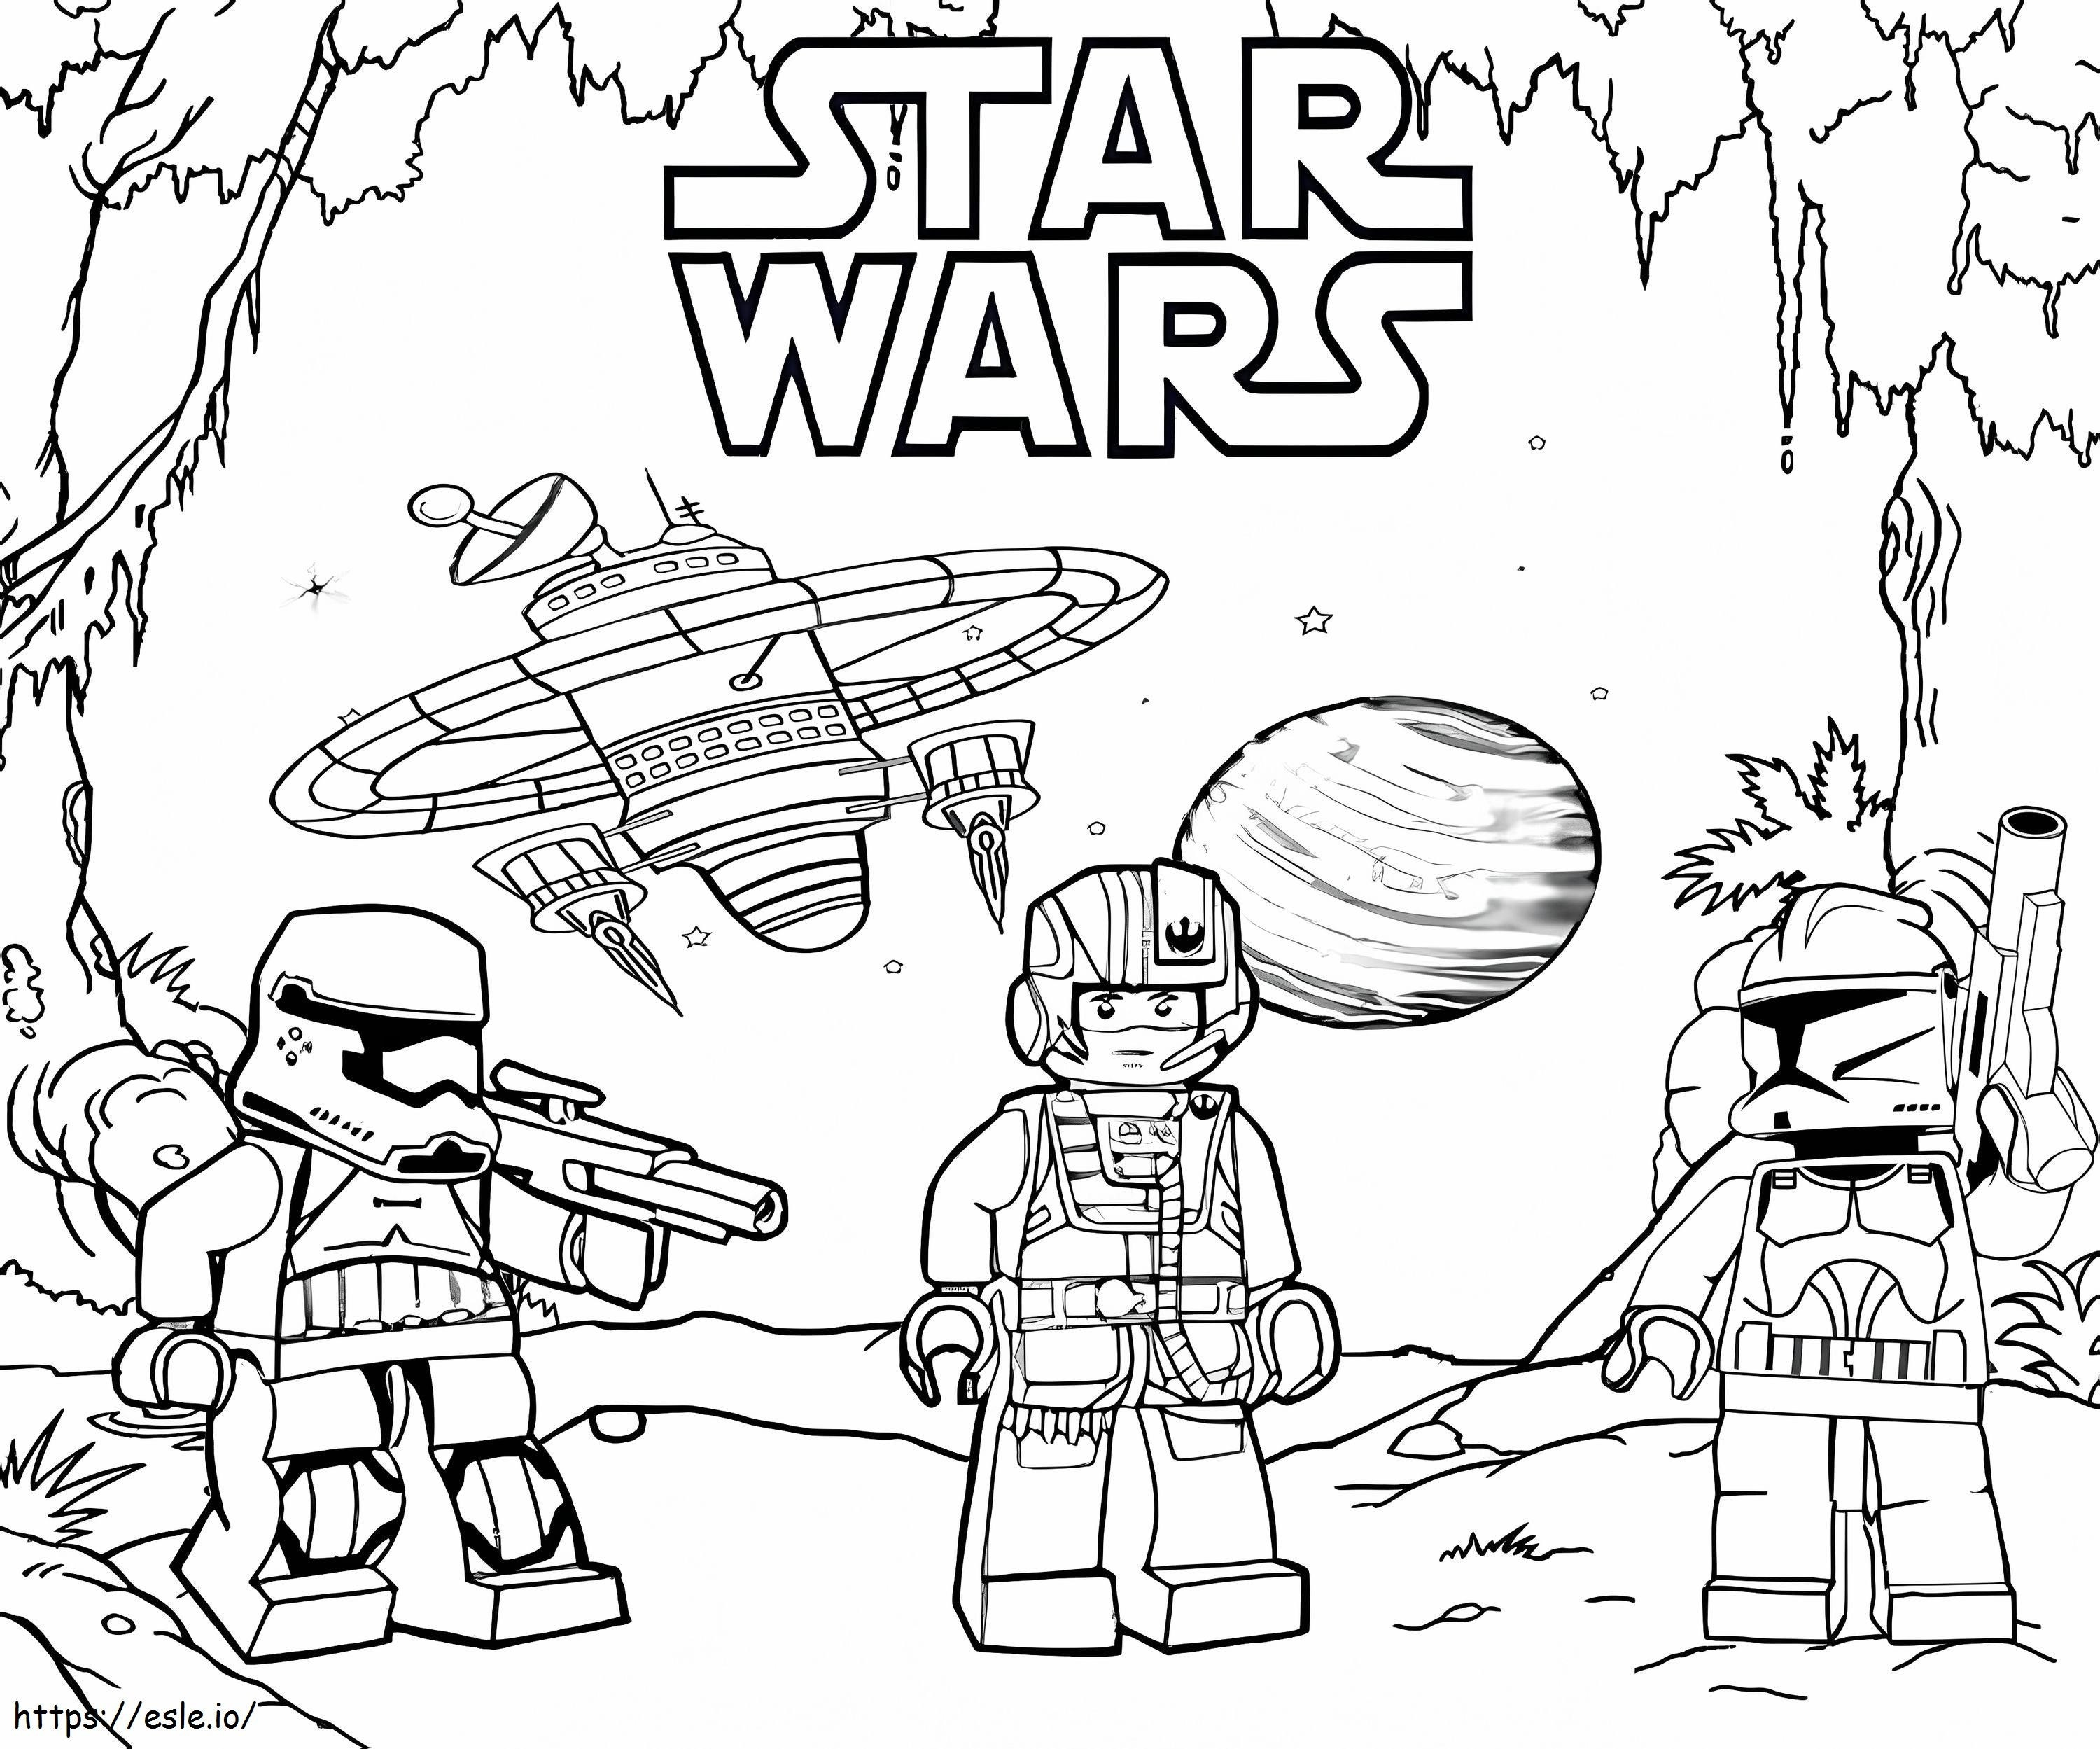 Lego Star Wars 1 coloring page